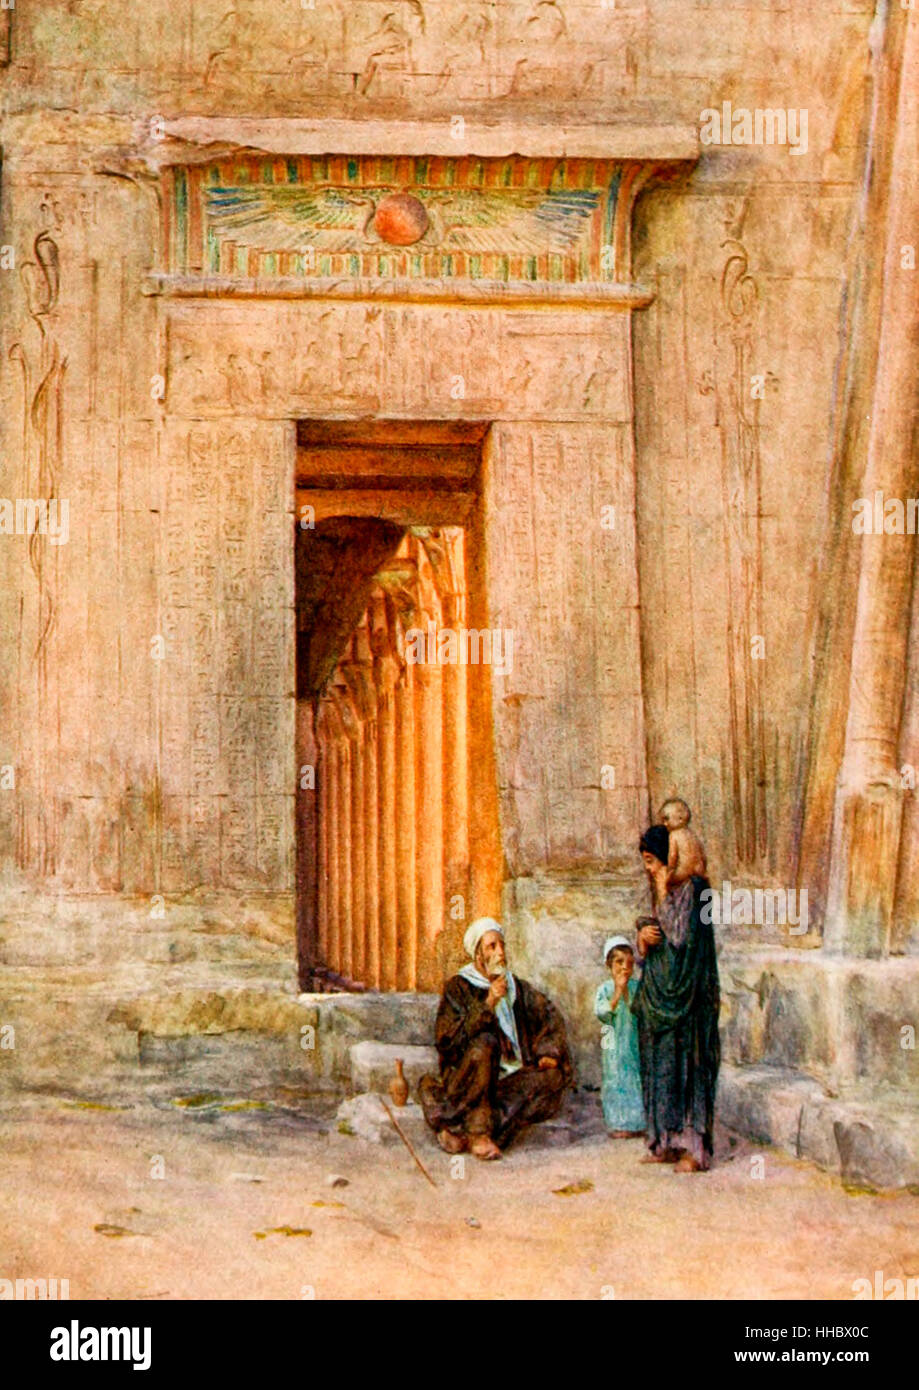 Doorway in the Temple of Isis, Egypt, circa 1912 Stock Photo